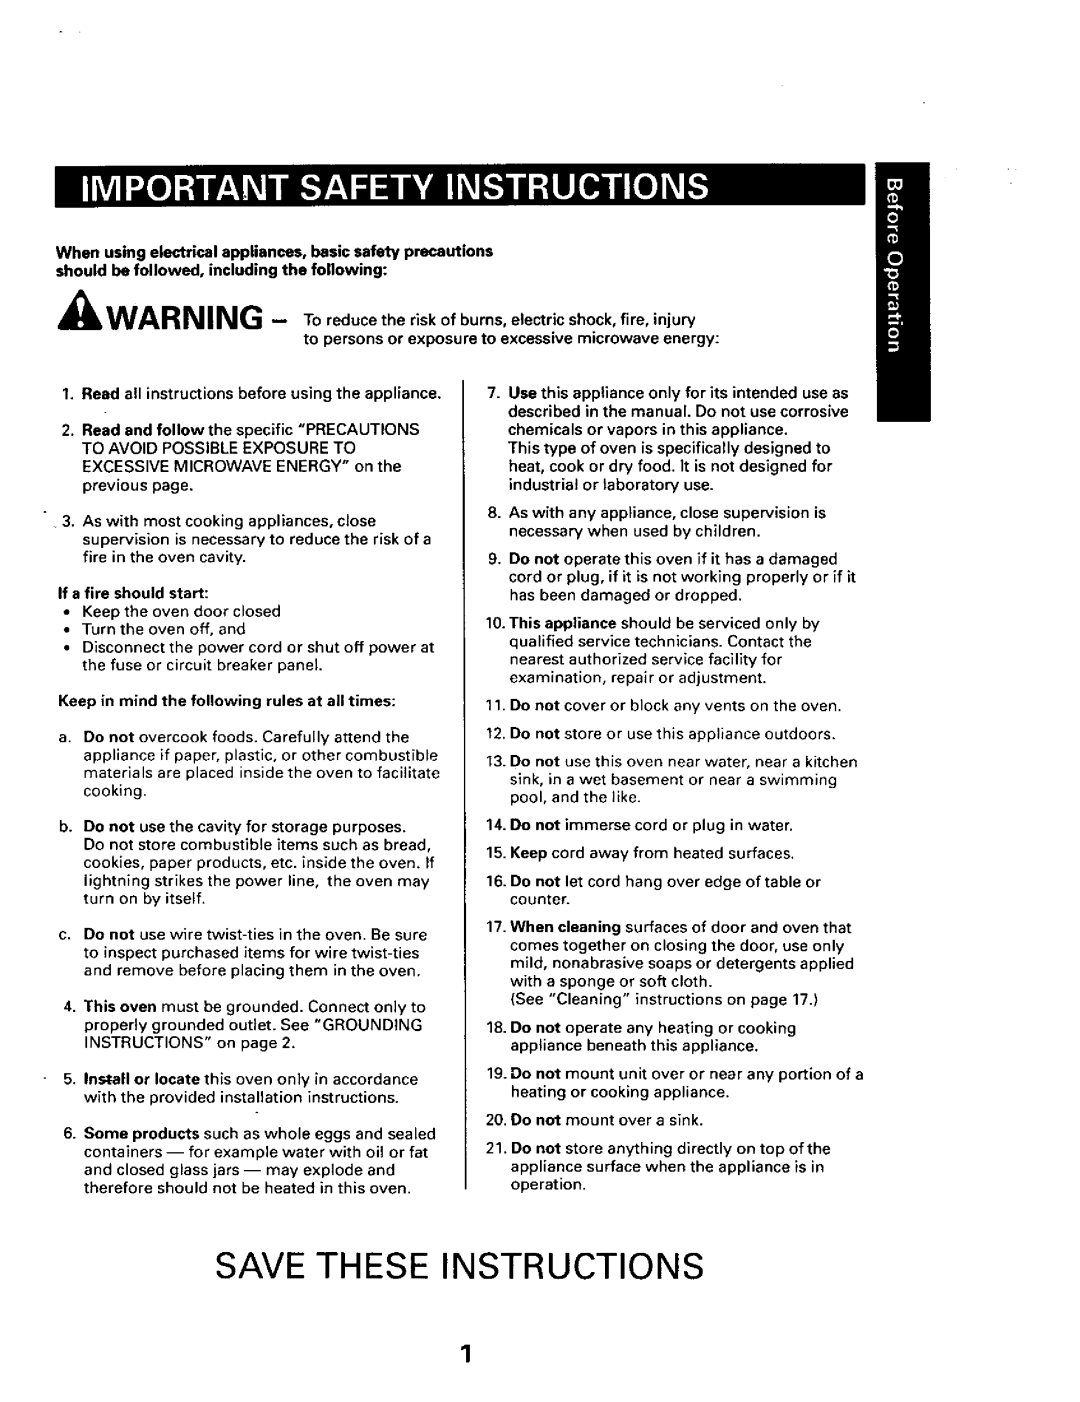 Sears 565.66101 owner manual Save These Instructions 